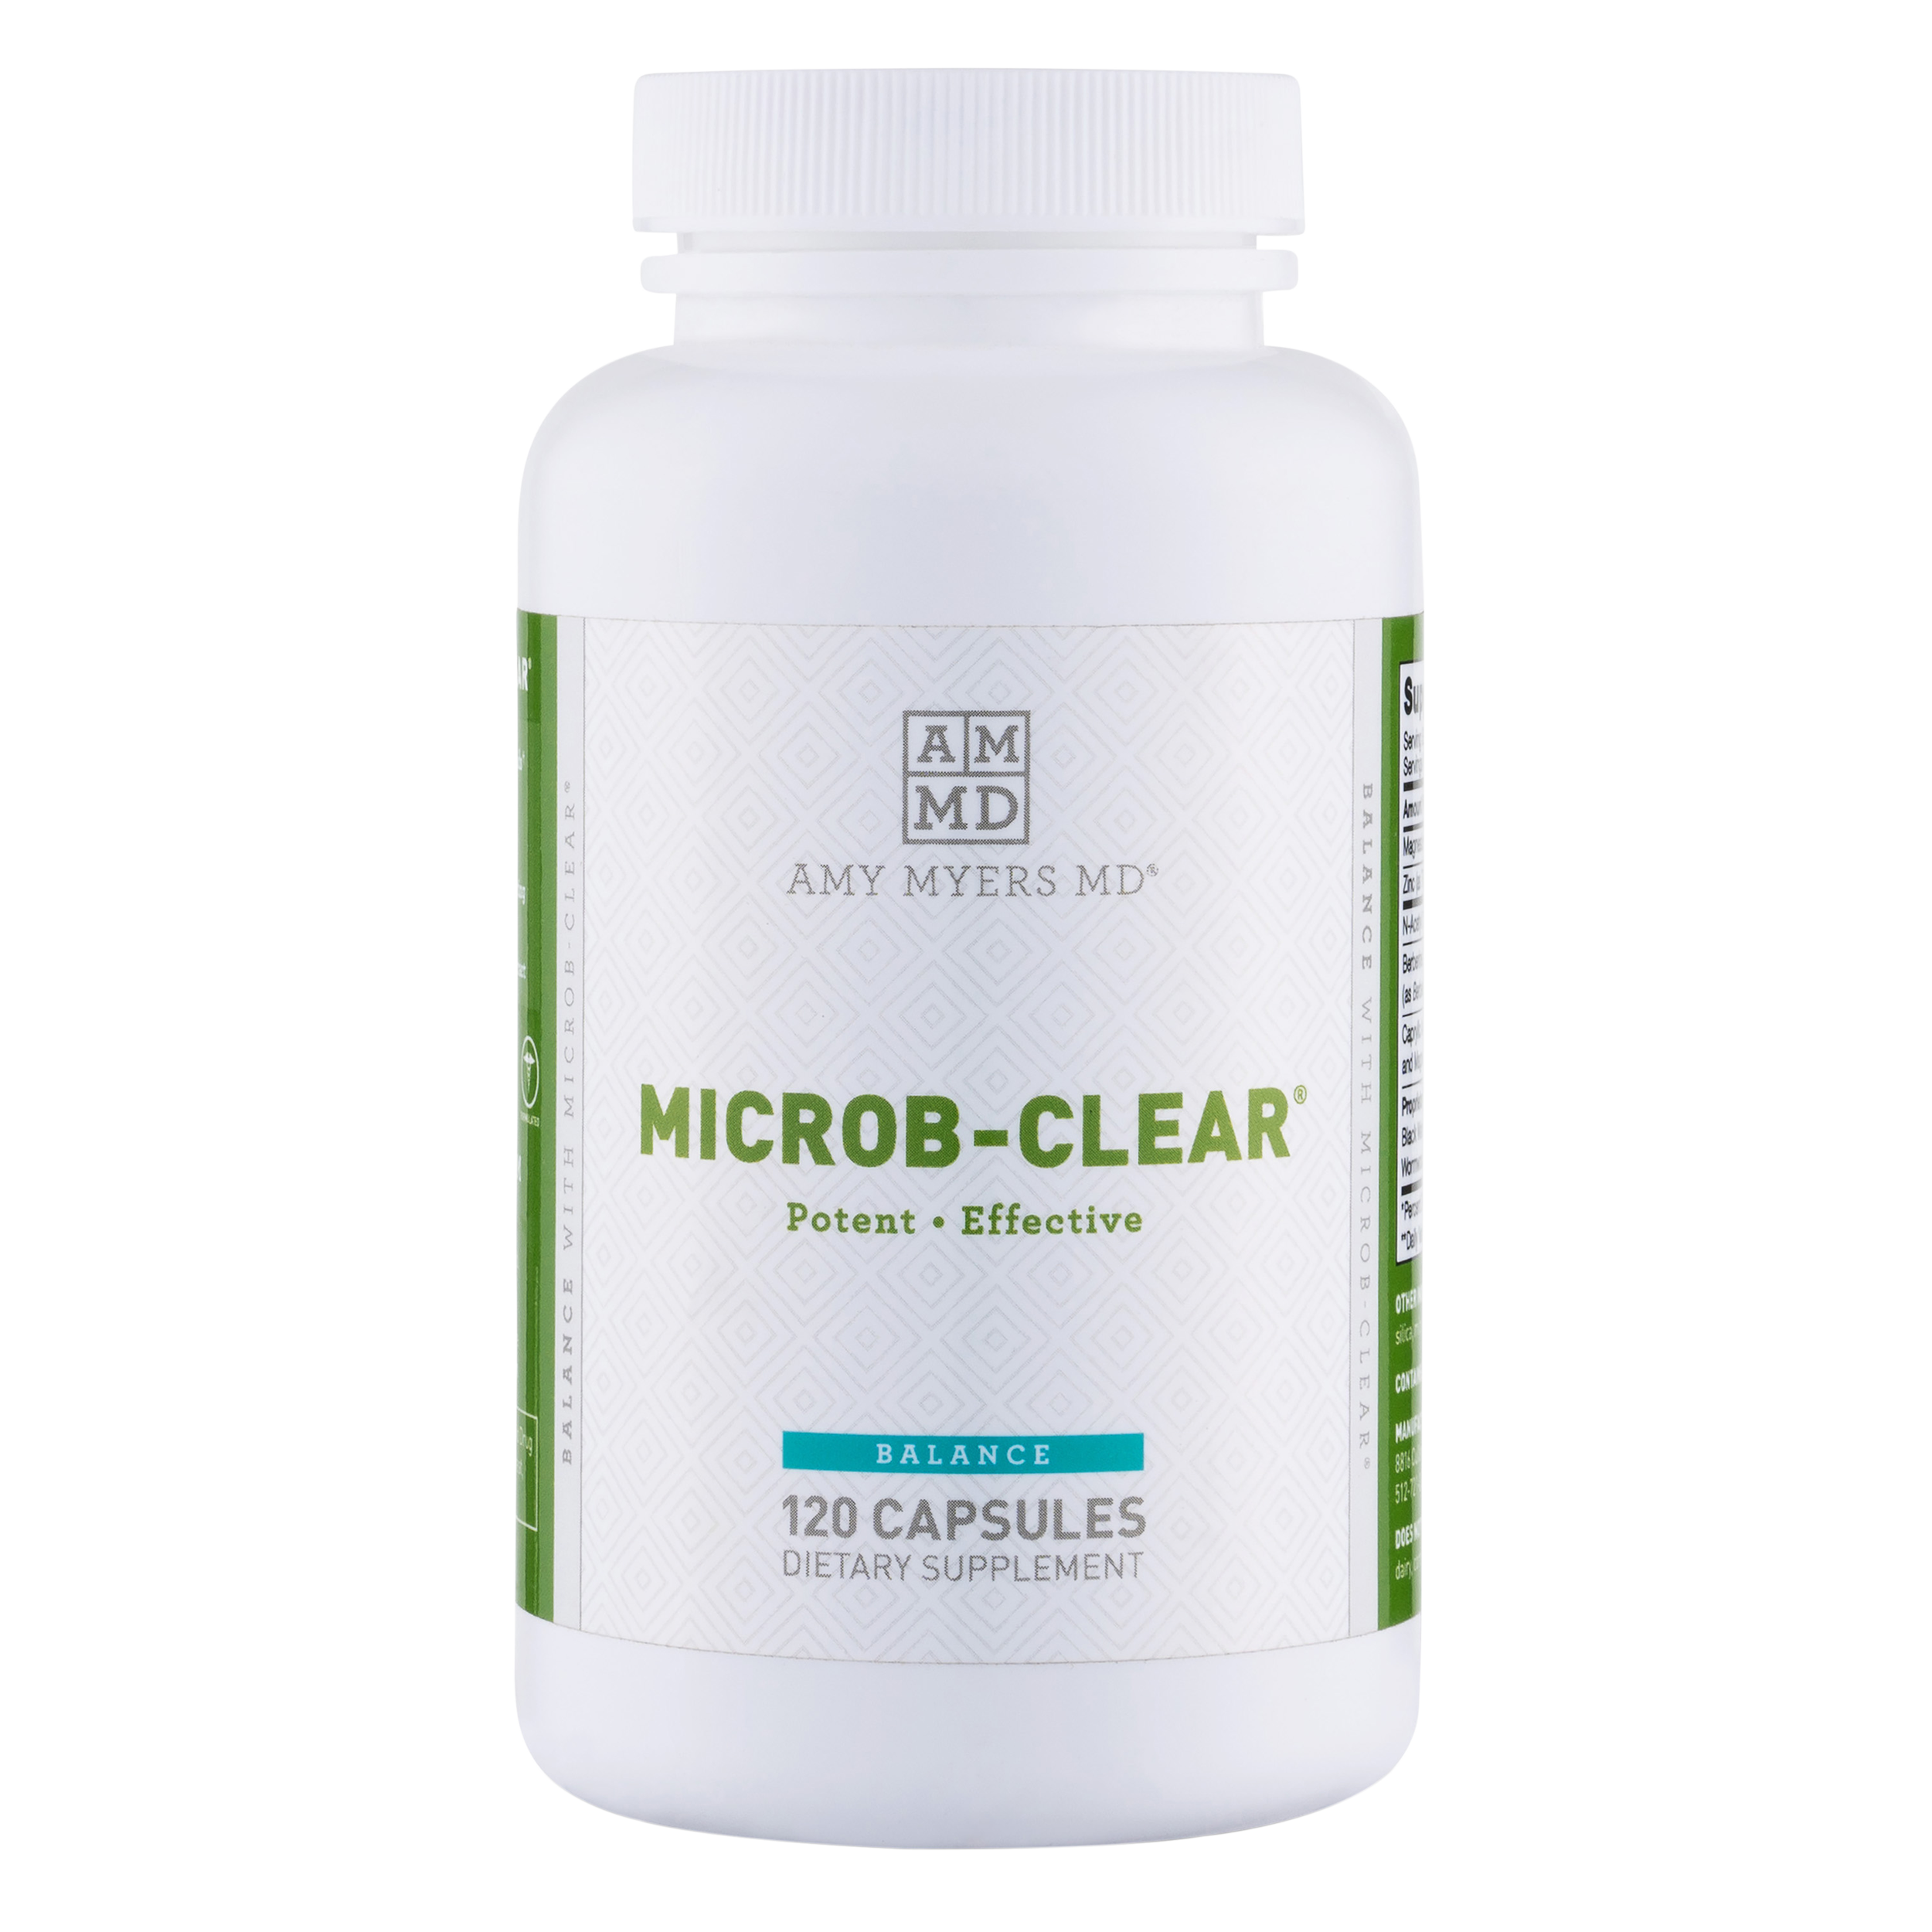 Microb-Clear - 120 Capsules | Amy Myers MD